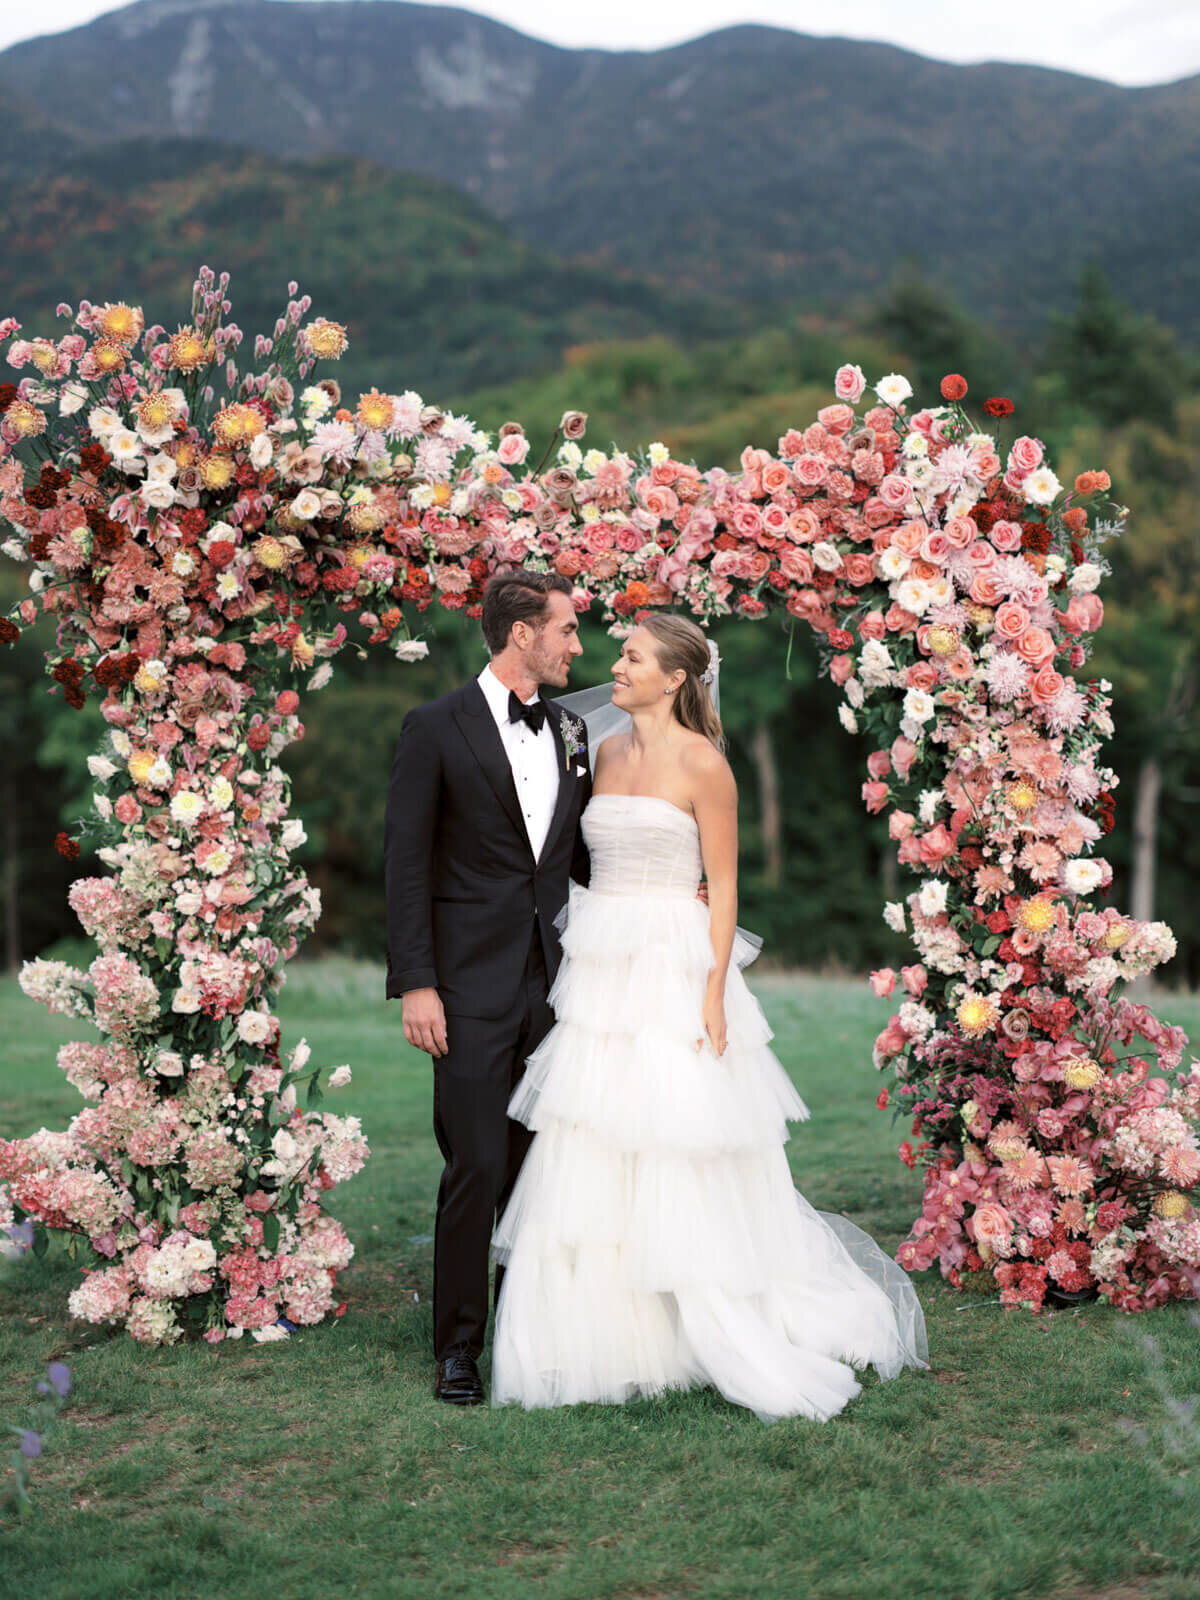 The bride and the groom are smiling at each other, with an arch full of flowers and mountains in the background at The Ausable Club, NY.